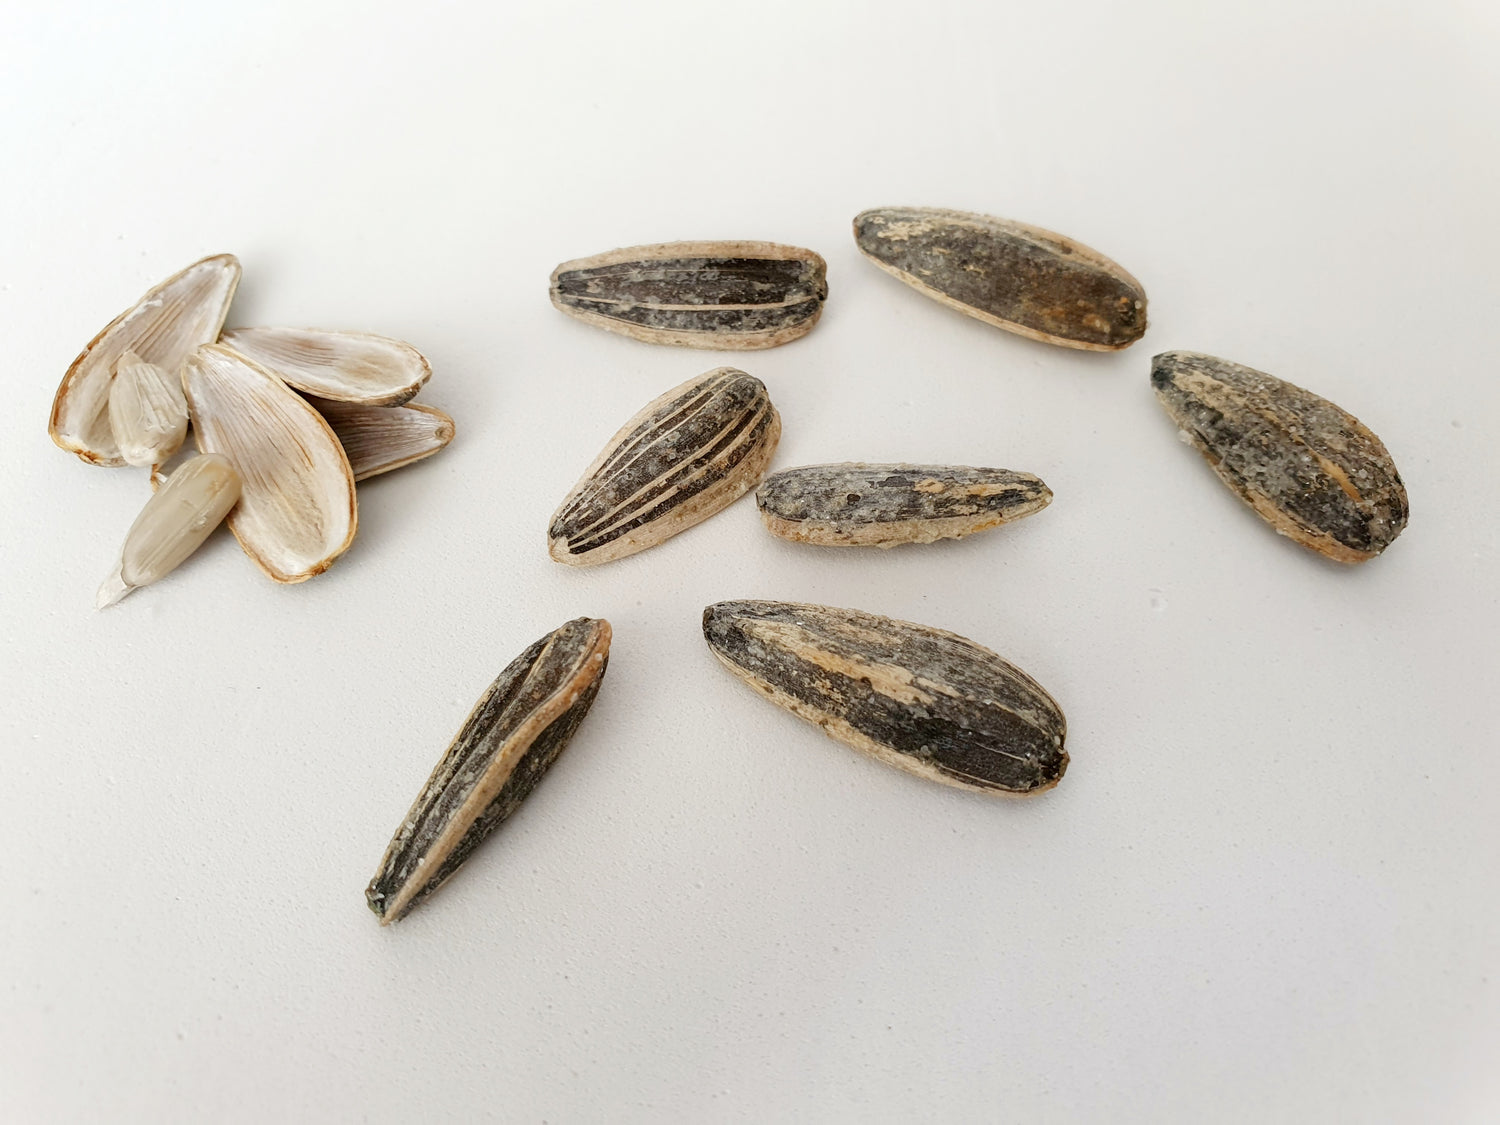 Sunflower Seeds for Beauty: How They Can Improve Your Skin and Hair